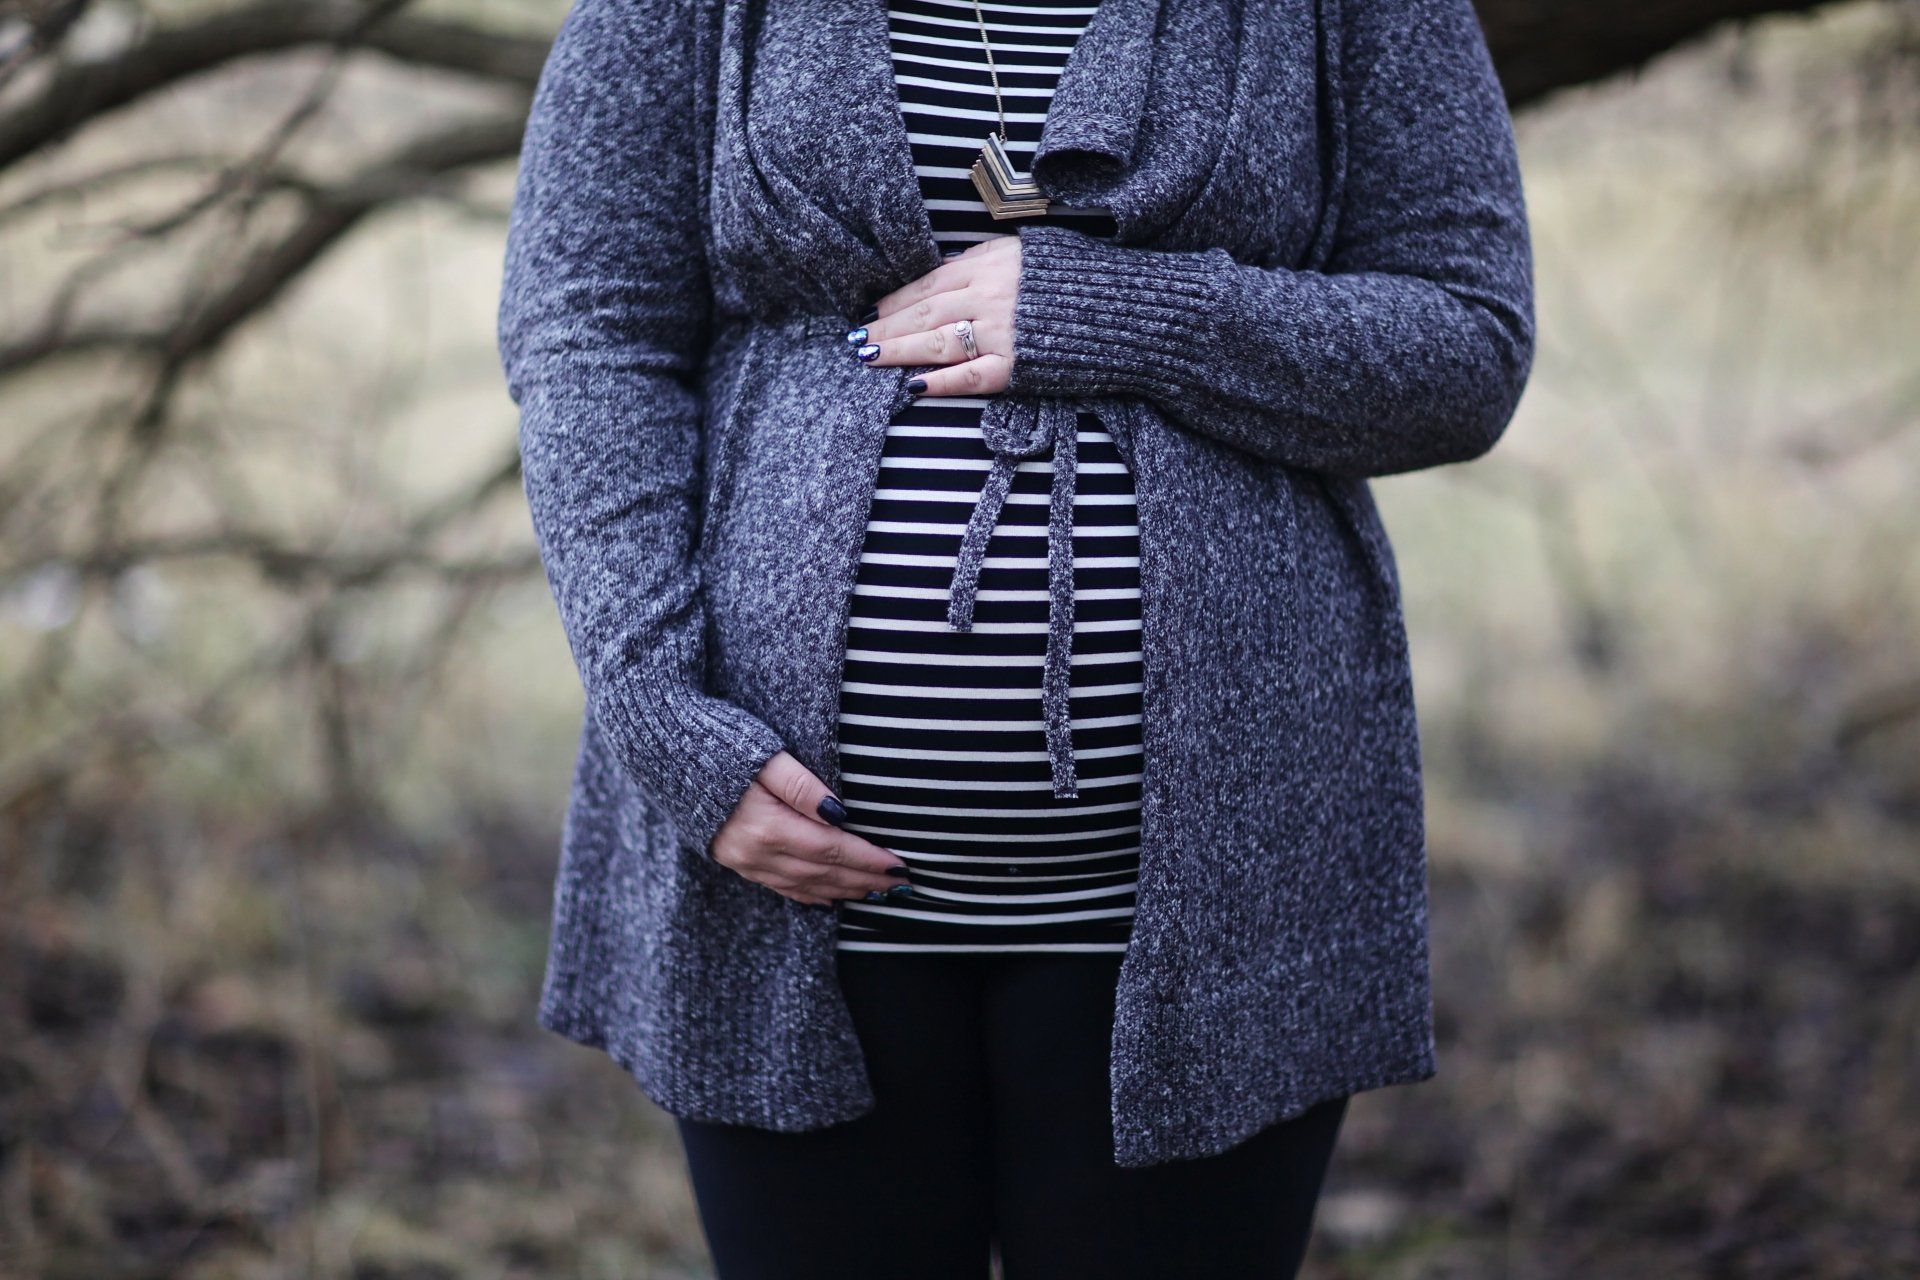 A pregnant woman in a striped shirt and cardigan is holding her belly.